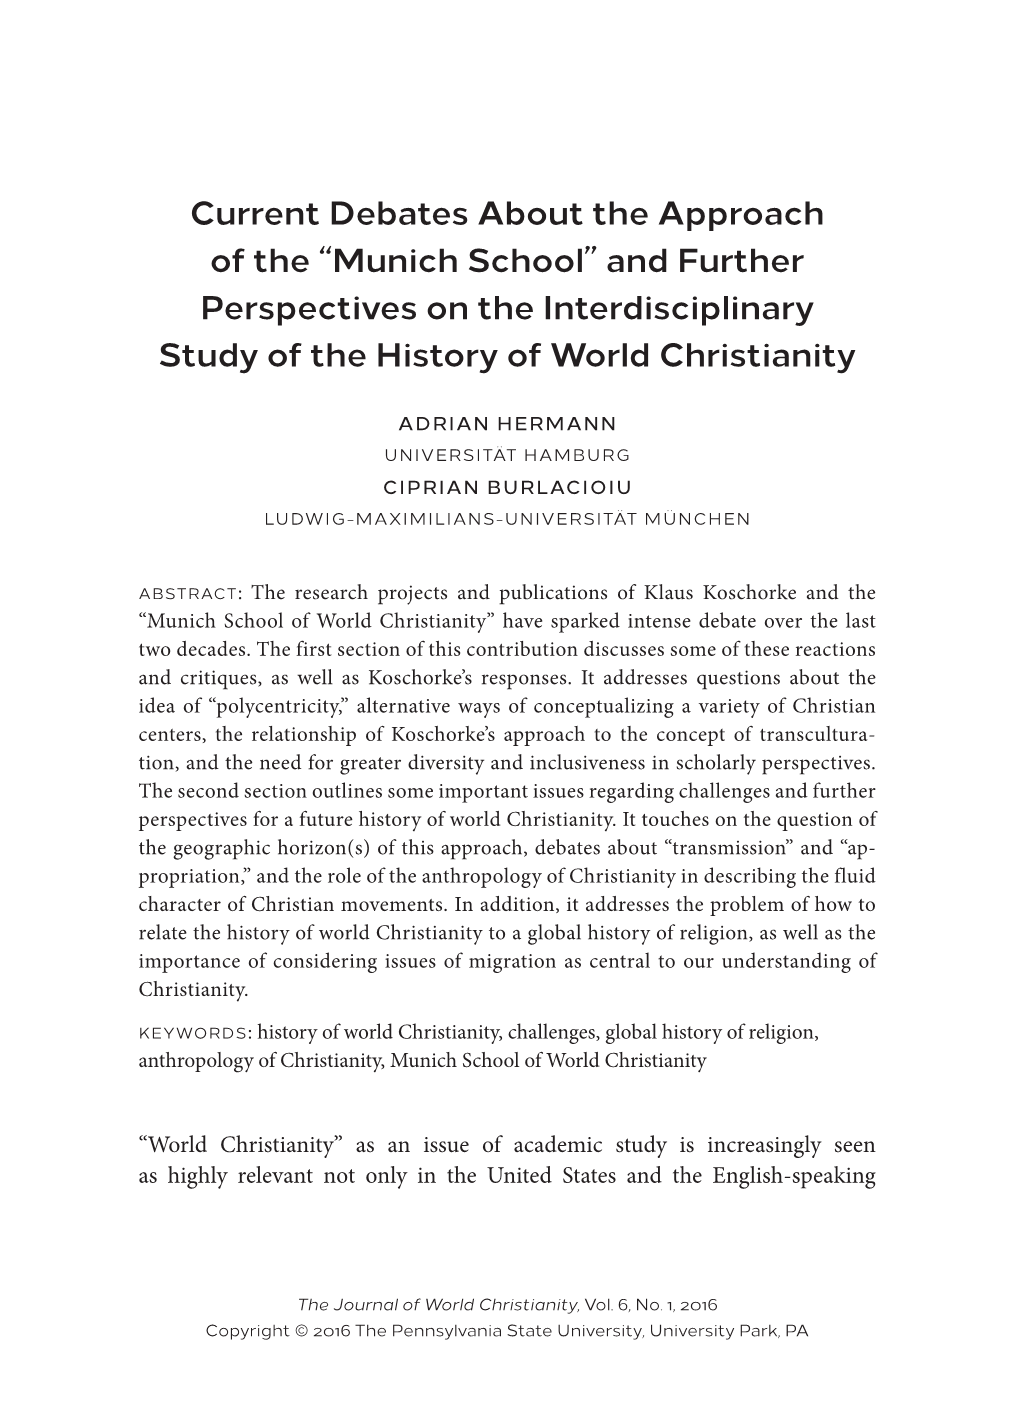 Munich School” and Further Perspectives on the Interdisciplinary Study of the History of World Christianity